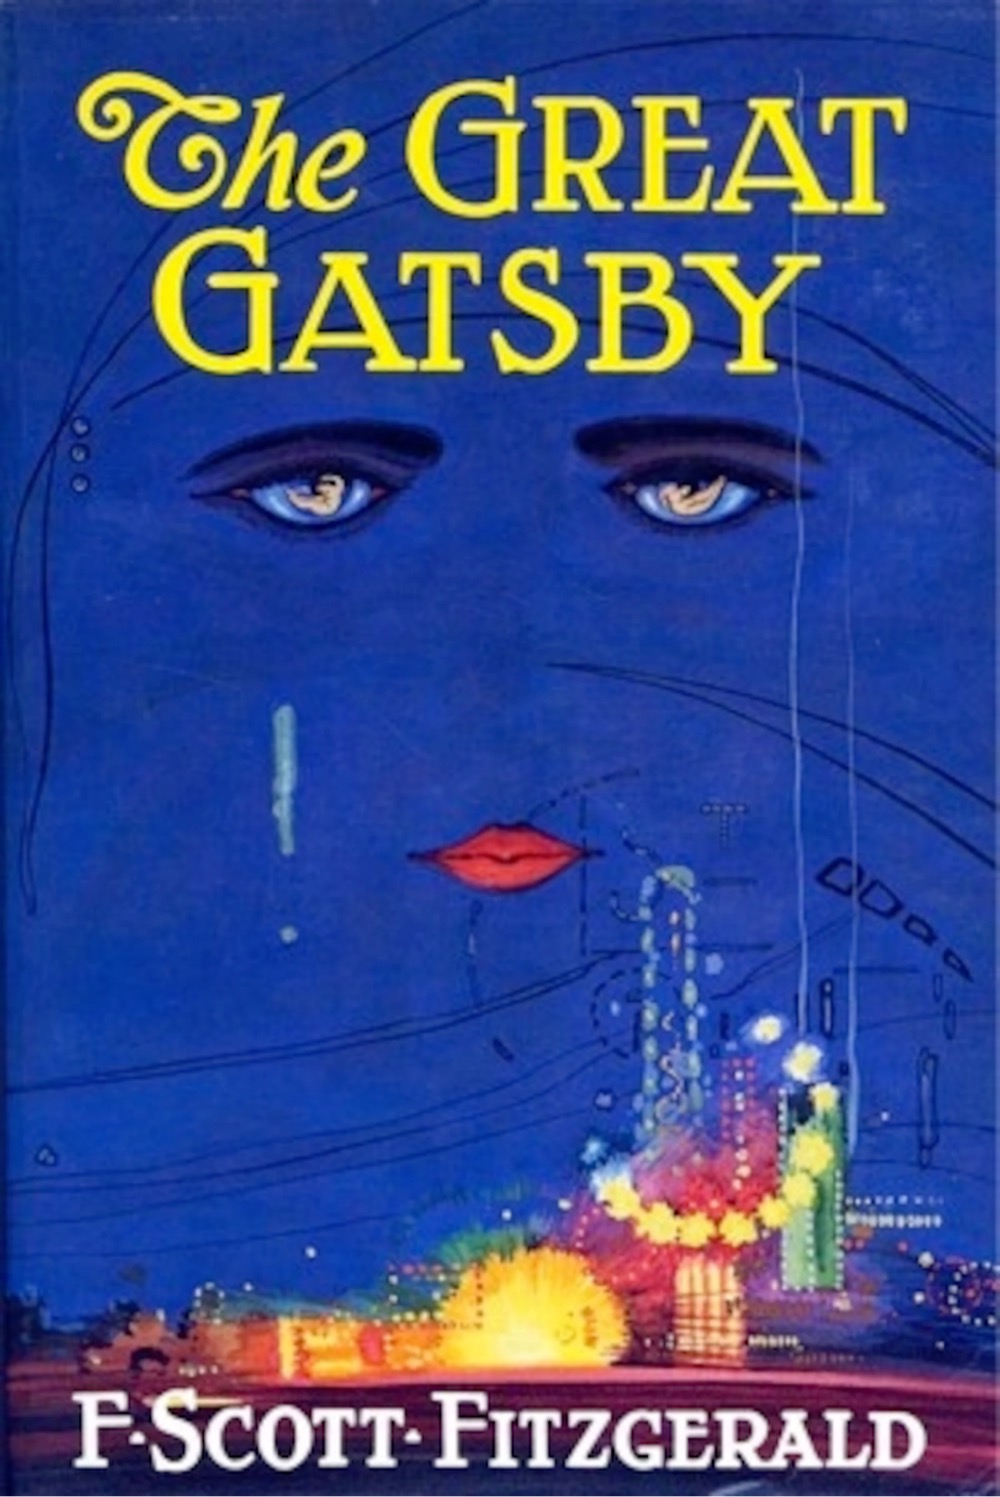 book cover for The Great Gatsby